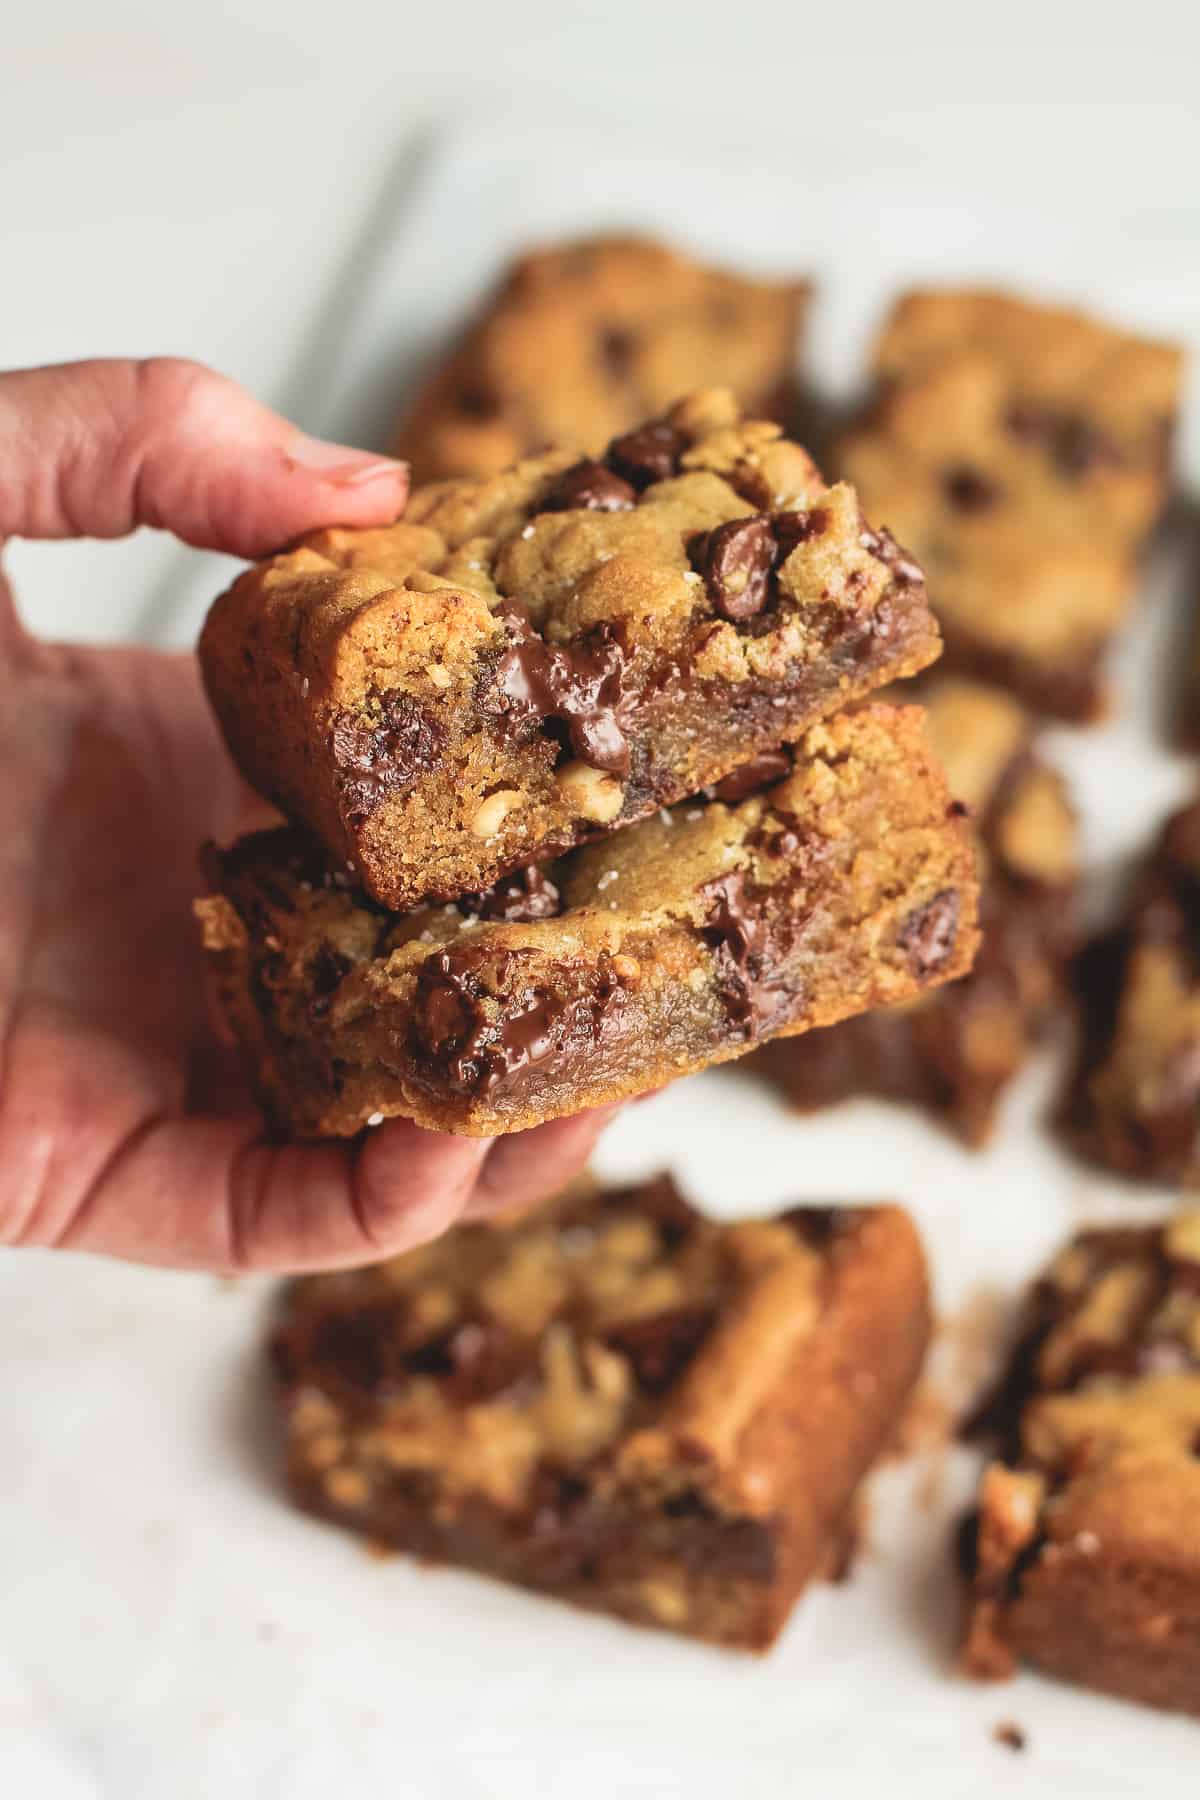 My hand holding two chocolate chip peanut butter blondies.